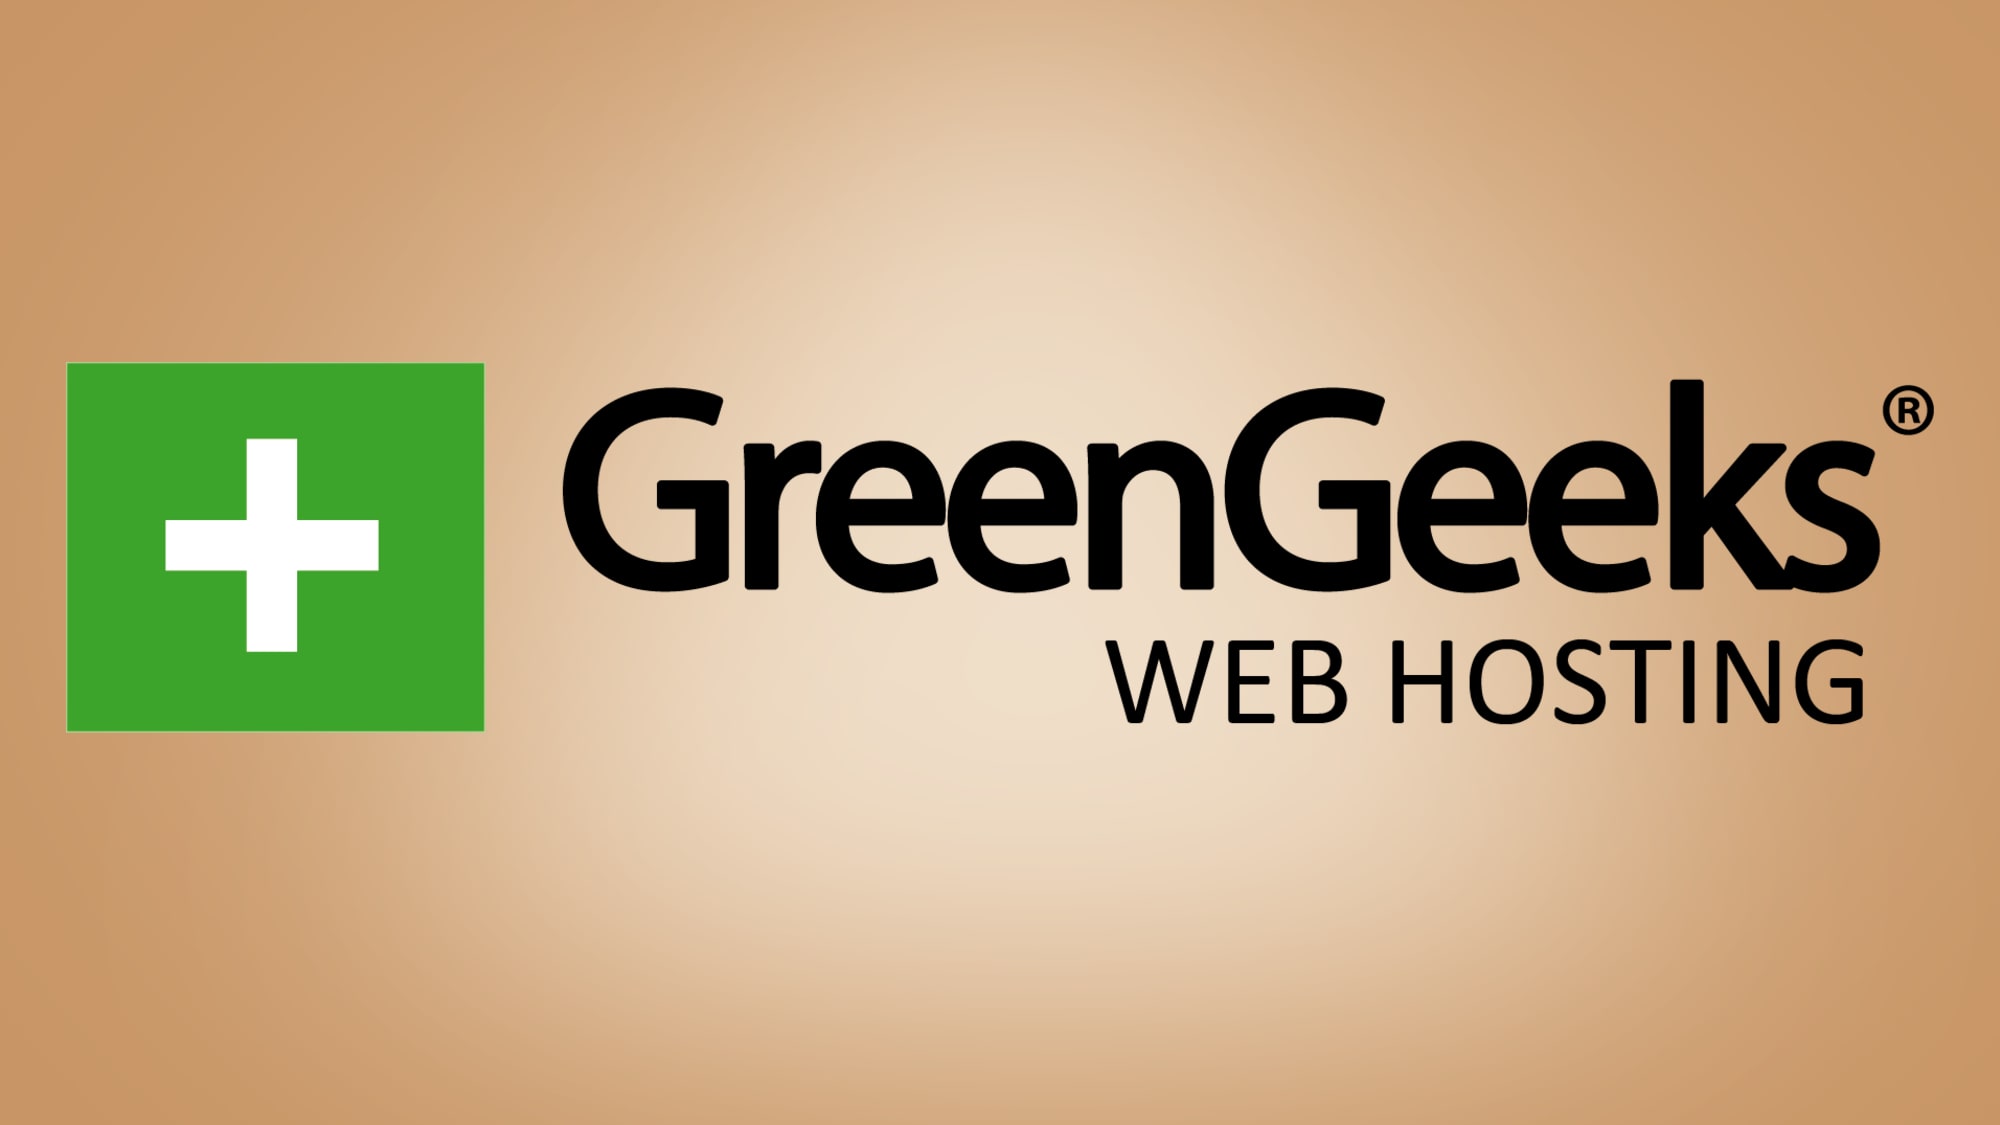 GreenGeeks logo on a beige background with a spotlight effect